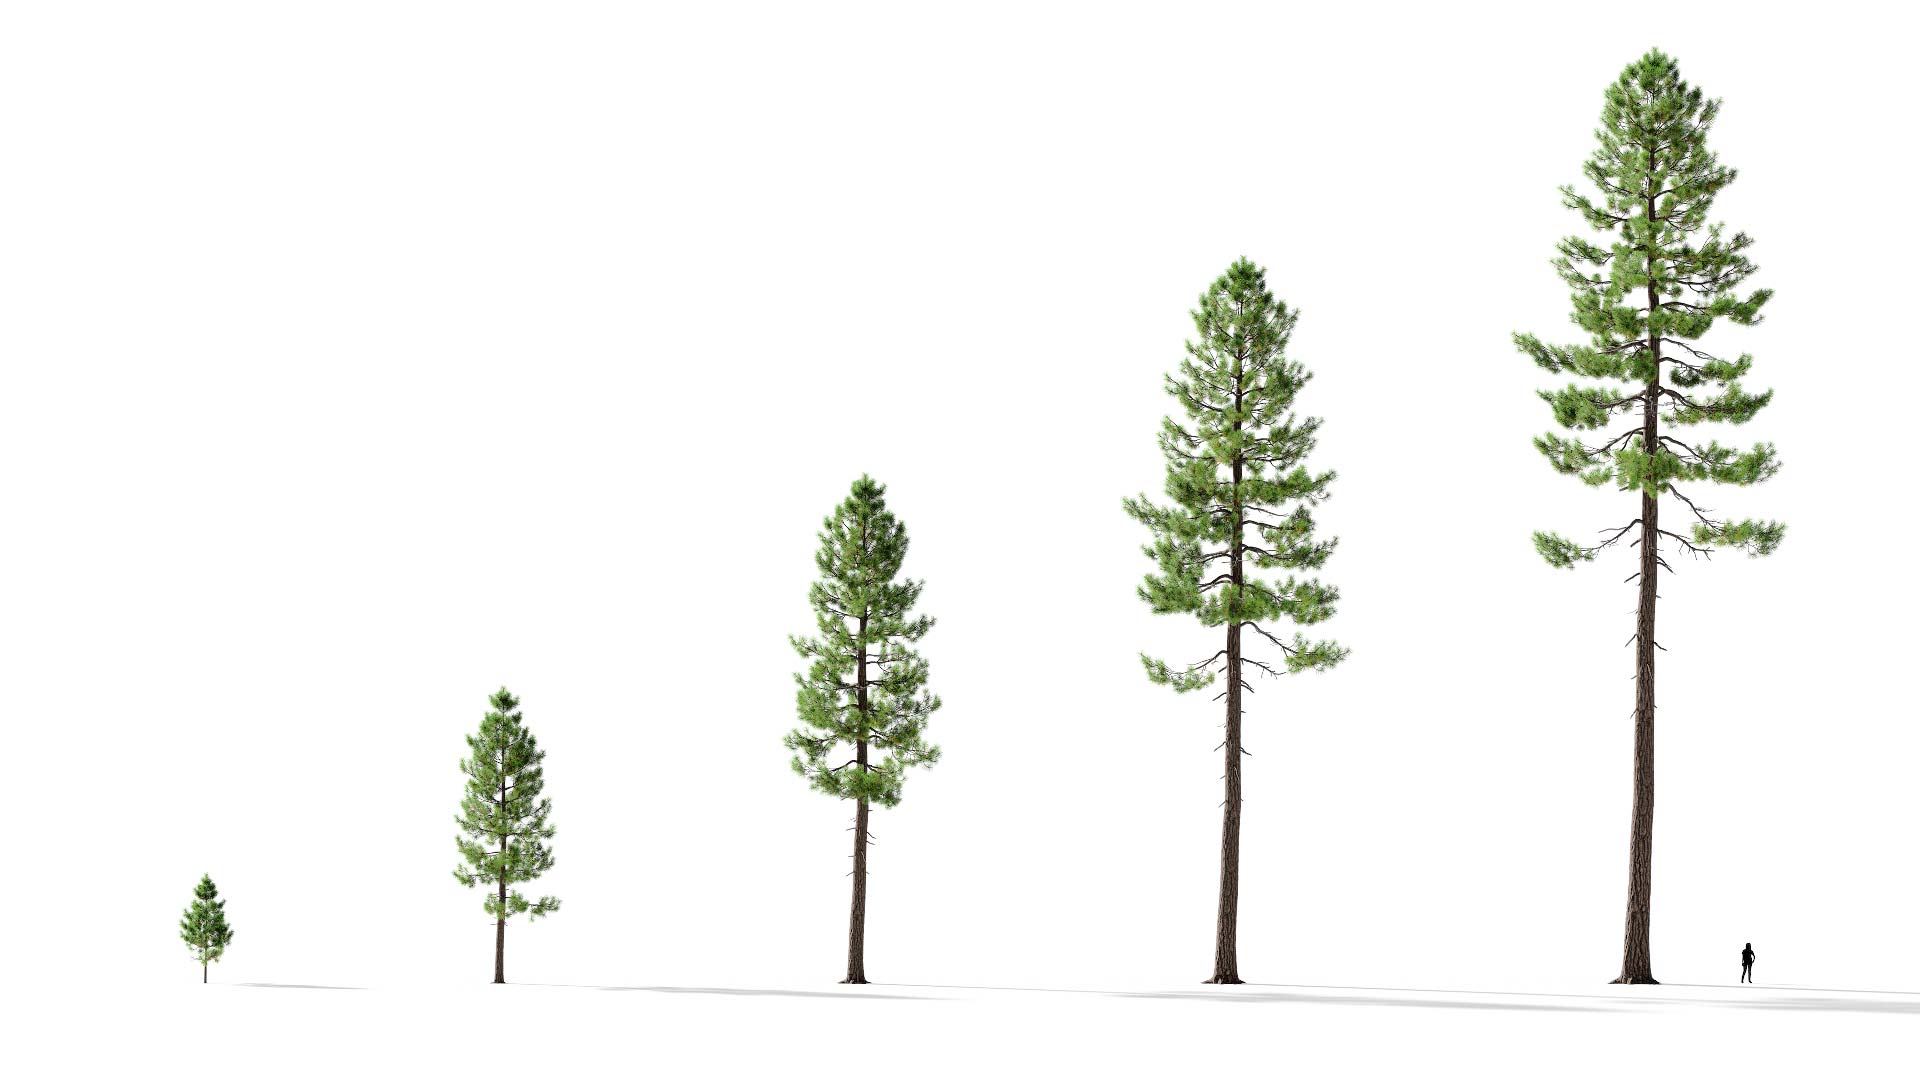 3D model of the Ponderosa pine forest Pinus ponderosa forest maturity variations